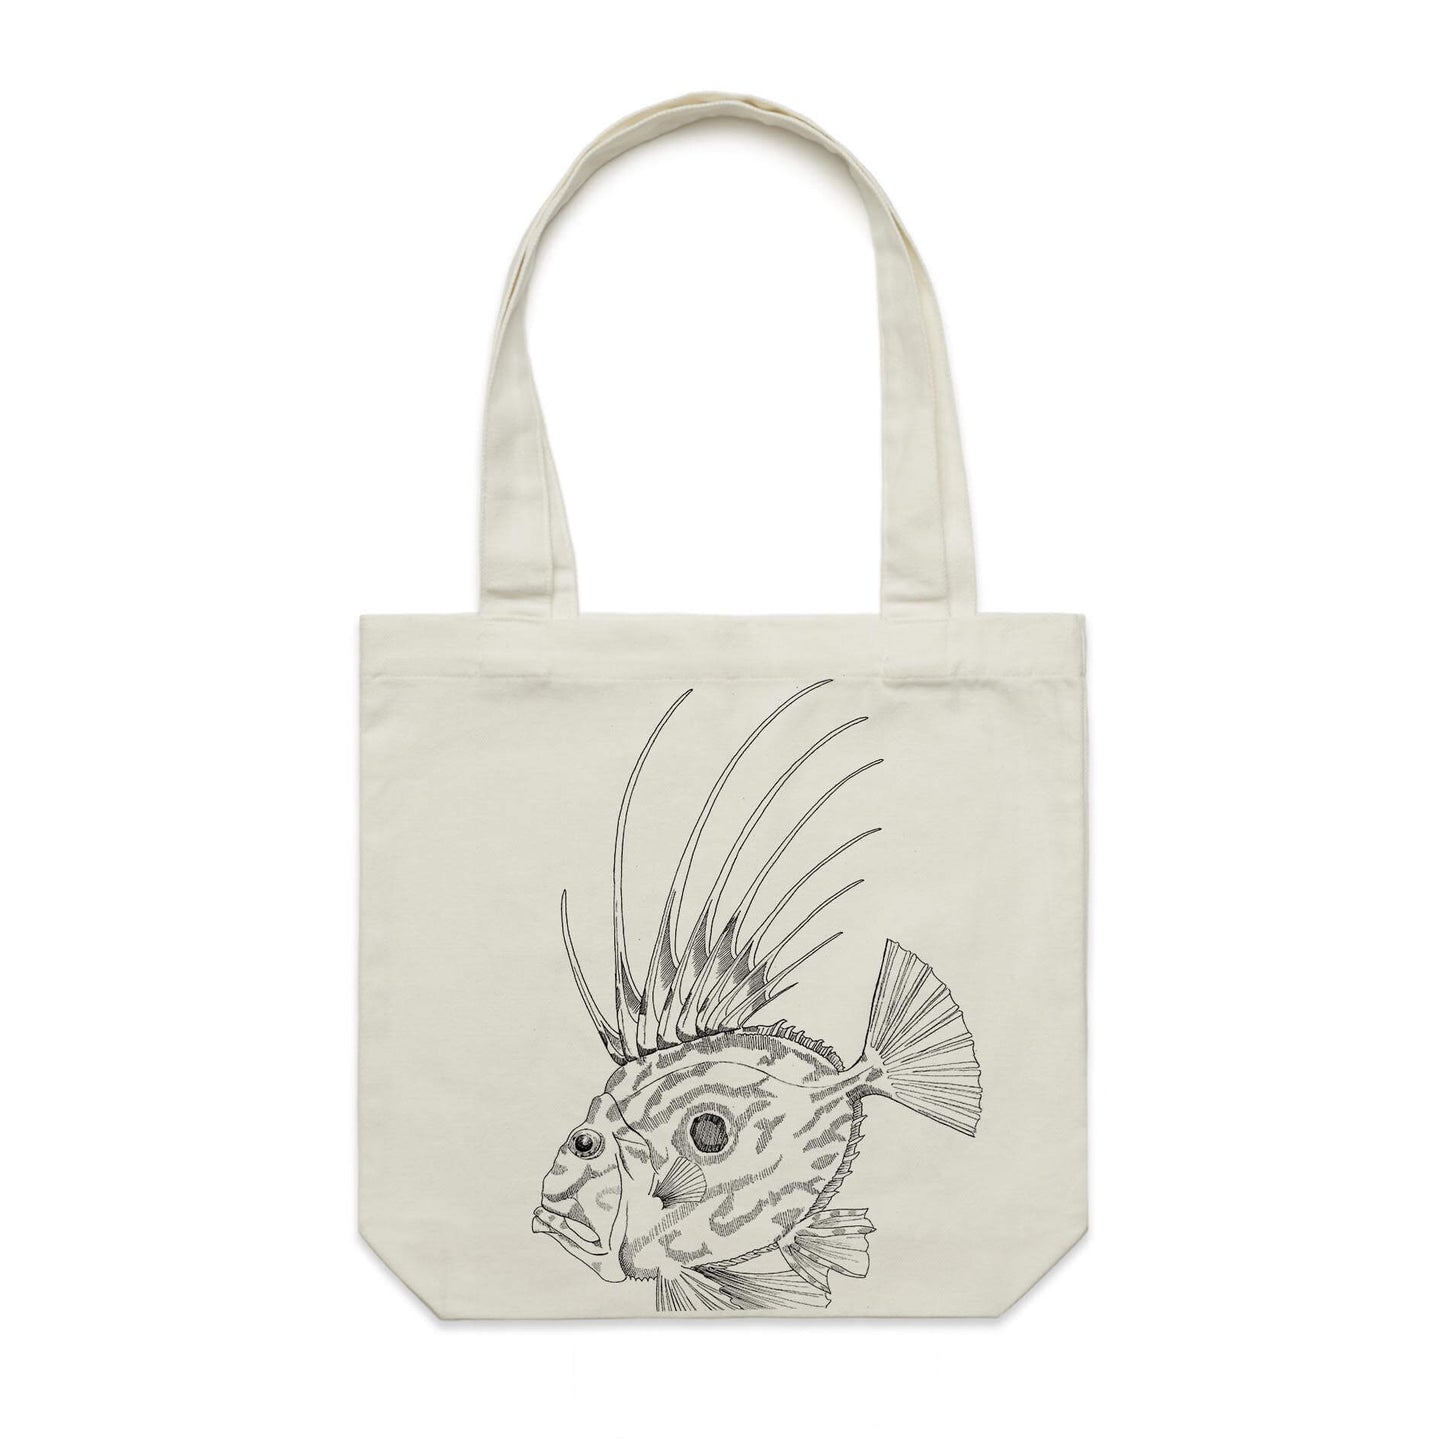 Cotton canvas tote bag with a screen printed John Dory design.